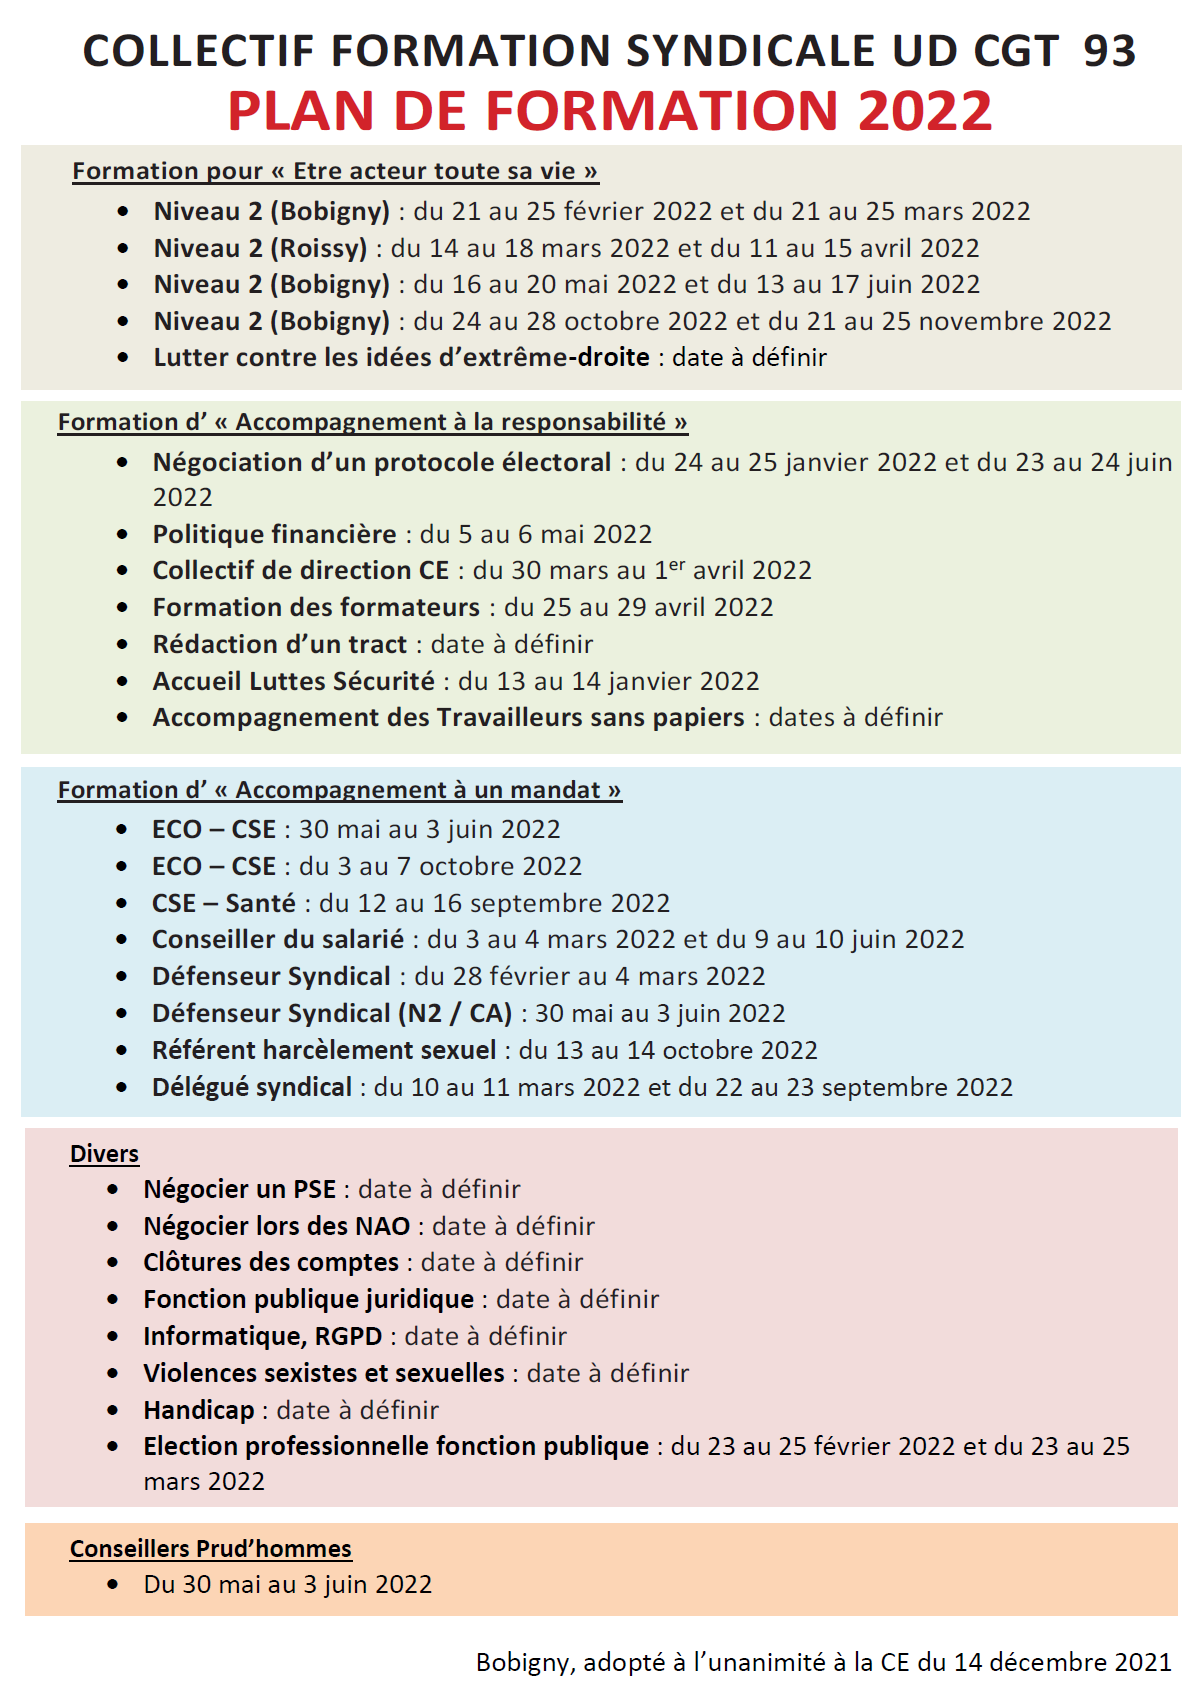 PLAN FORMATION 2022 UD CGT 93.png